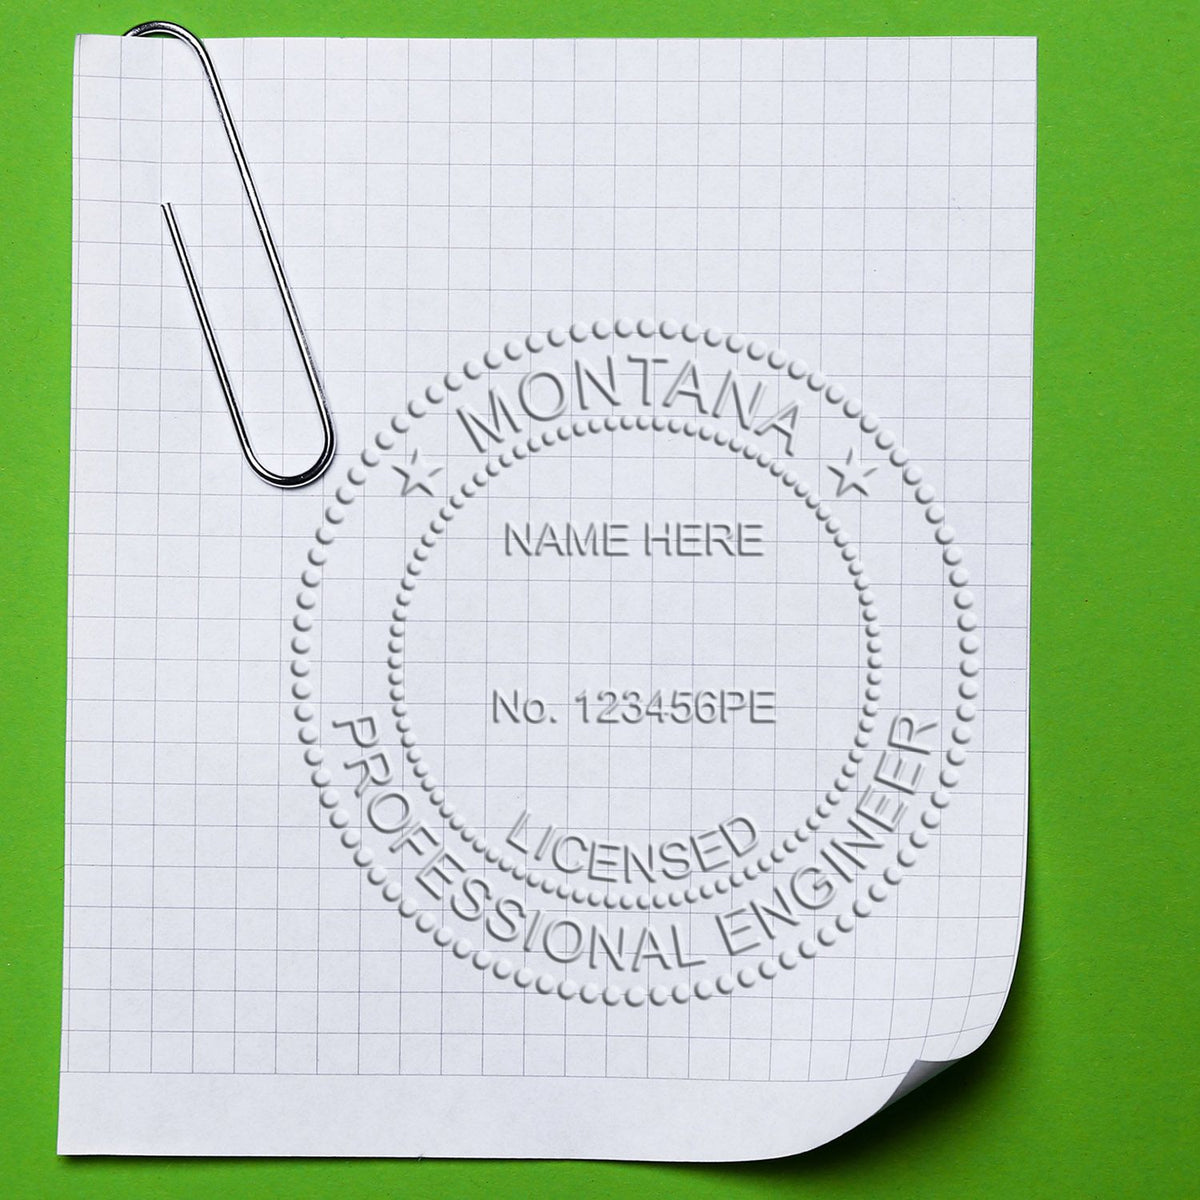 A photograph of the Soft Montana Professional Engineer Seal stamp impression reveals a vivid, professional image of the on paper.